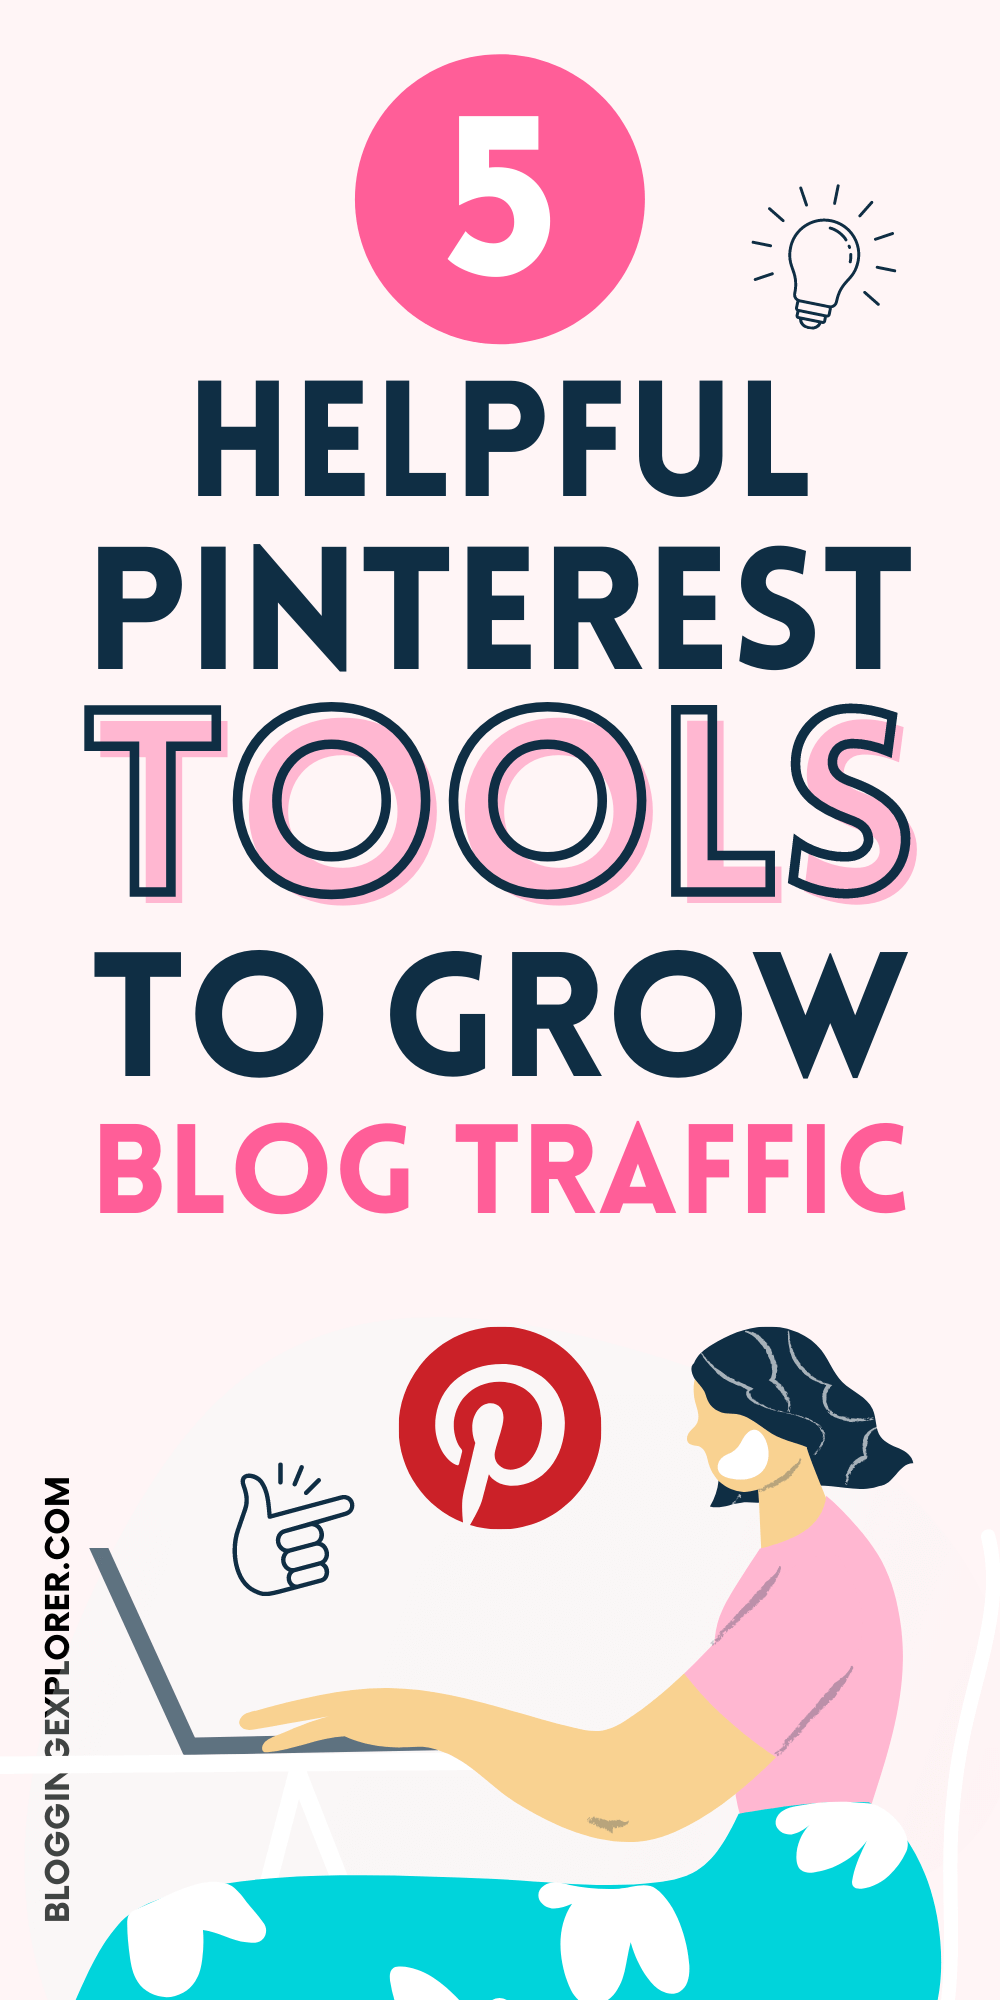 Pinterest marketing tools for bloggers